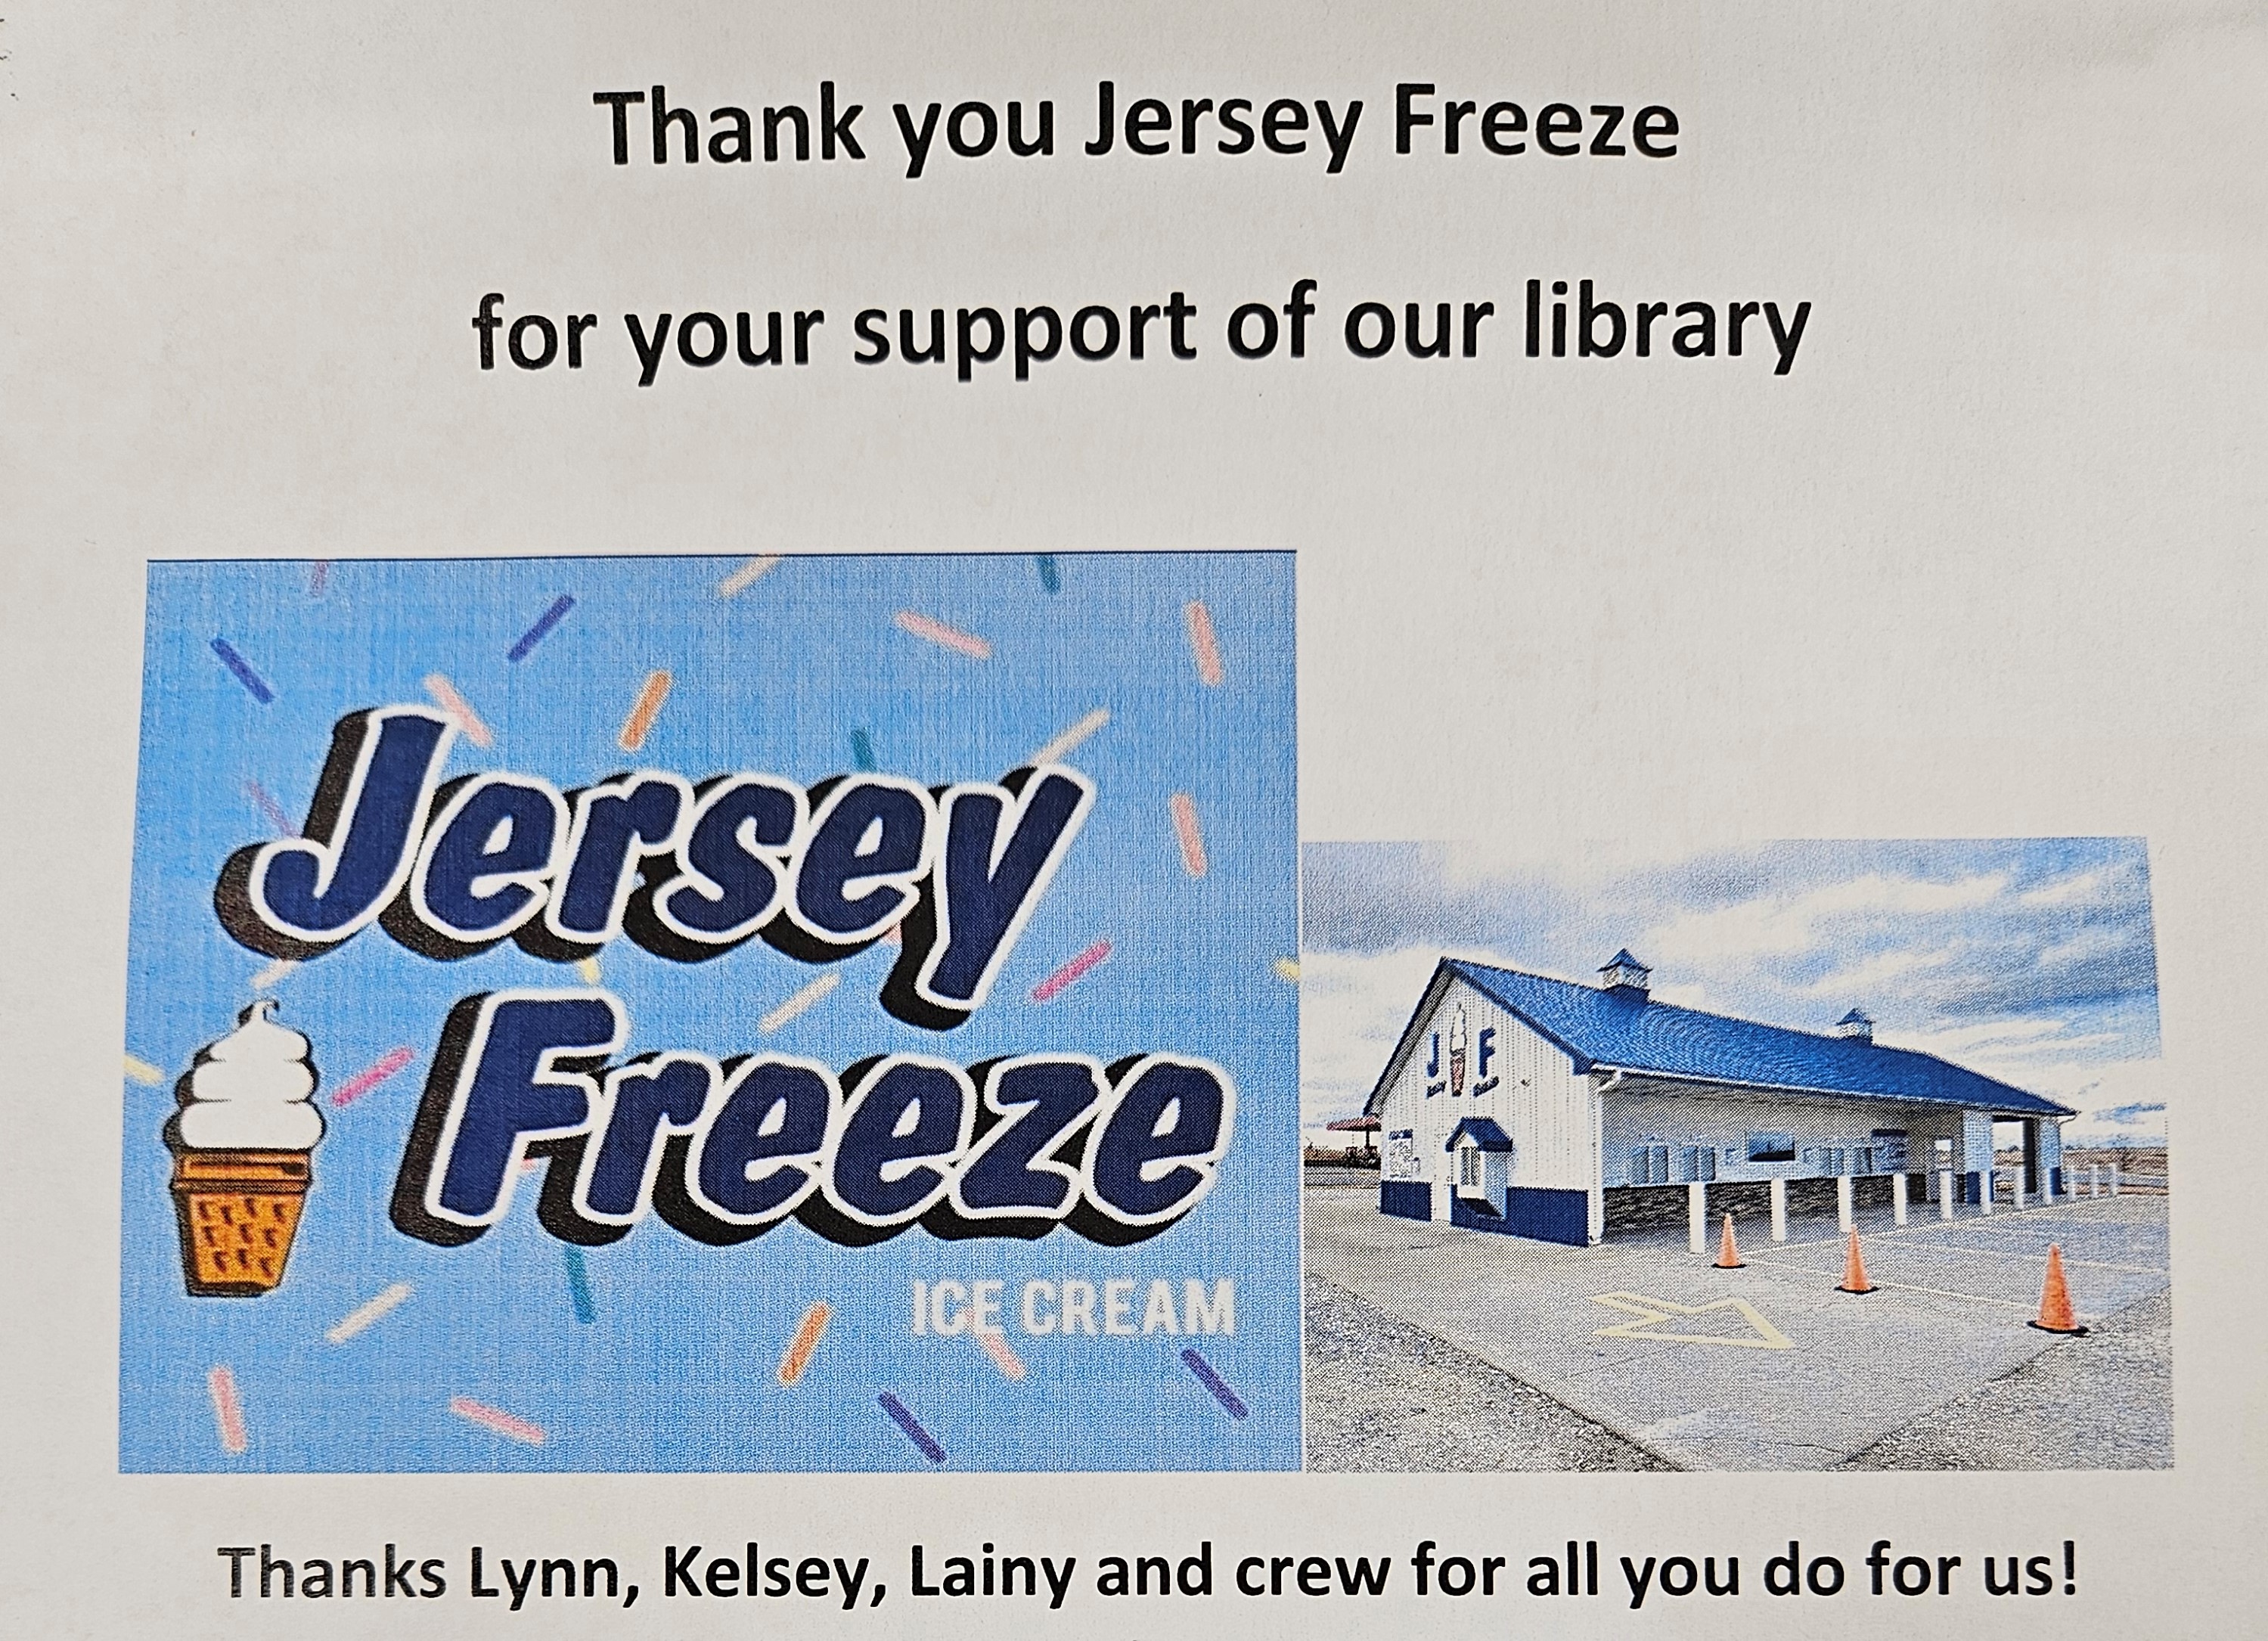 Thank you Jersey Freeze for all of your support!!